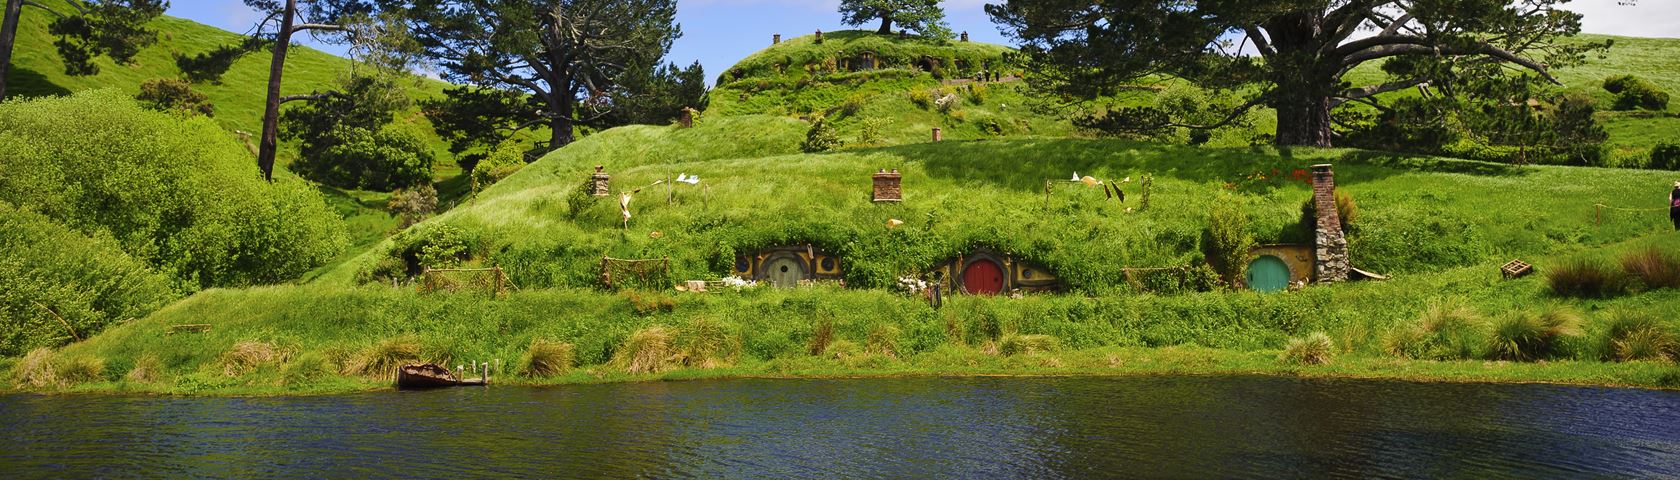 The Shire, Middle Earth